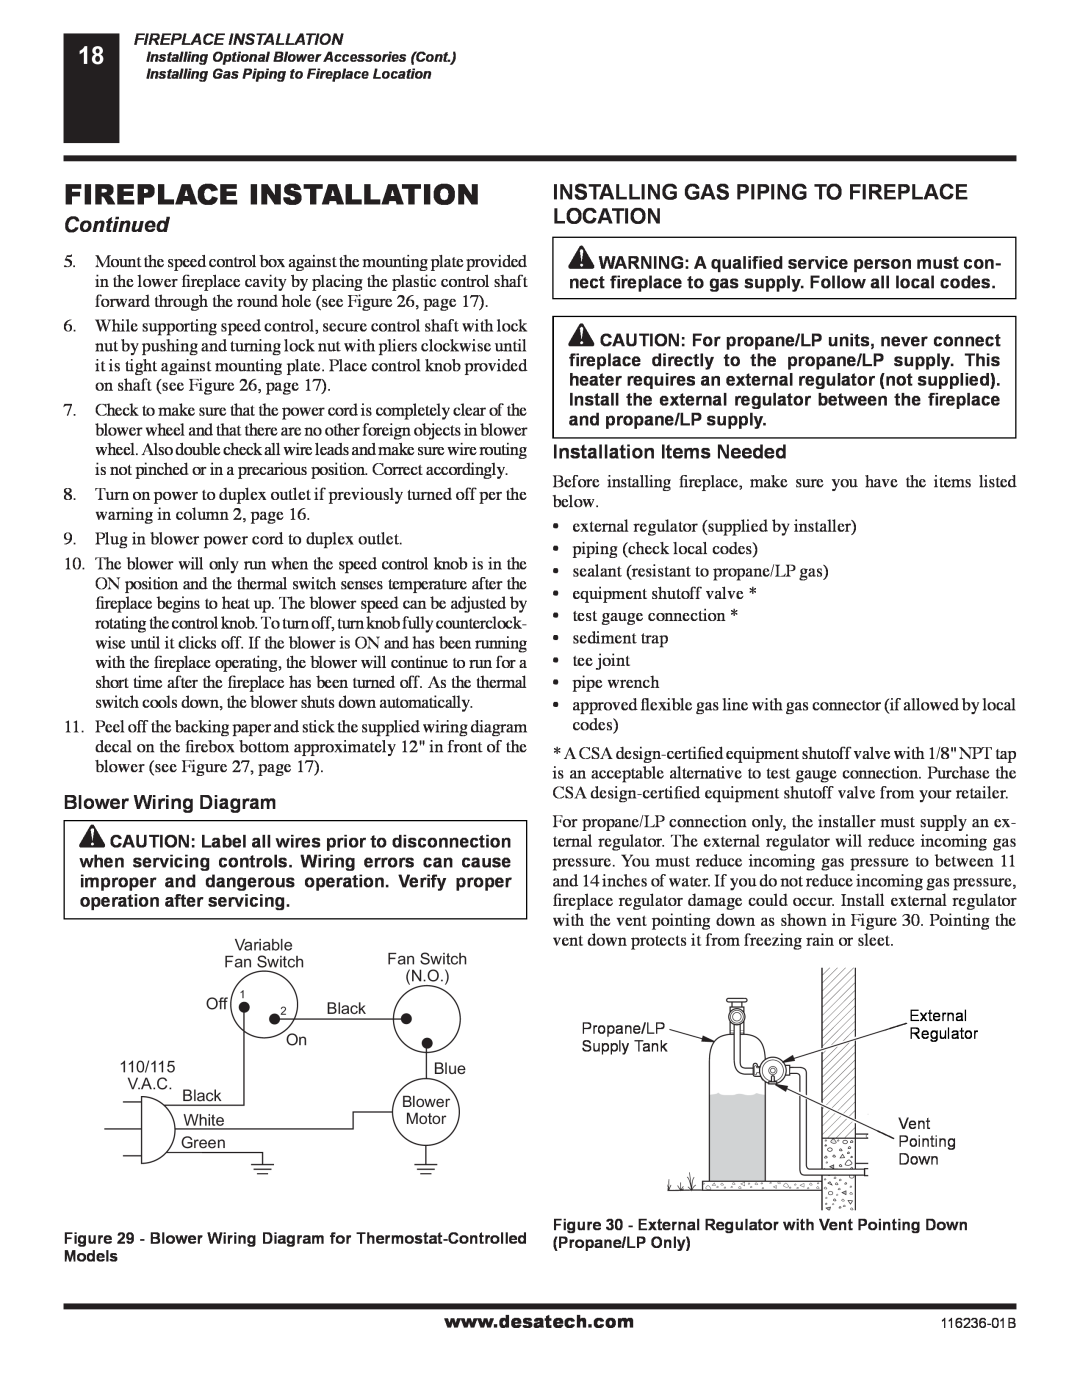 Desa (V)VC42P SERIES Installing Gas Piping To Fireplace Location, Blower Wiring Diagram, Installation Items Needed 